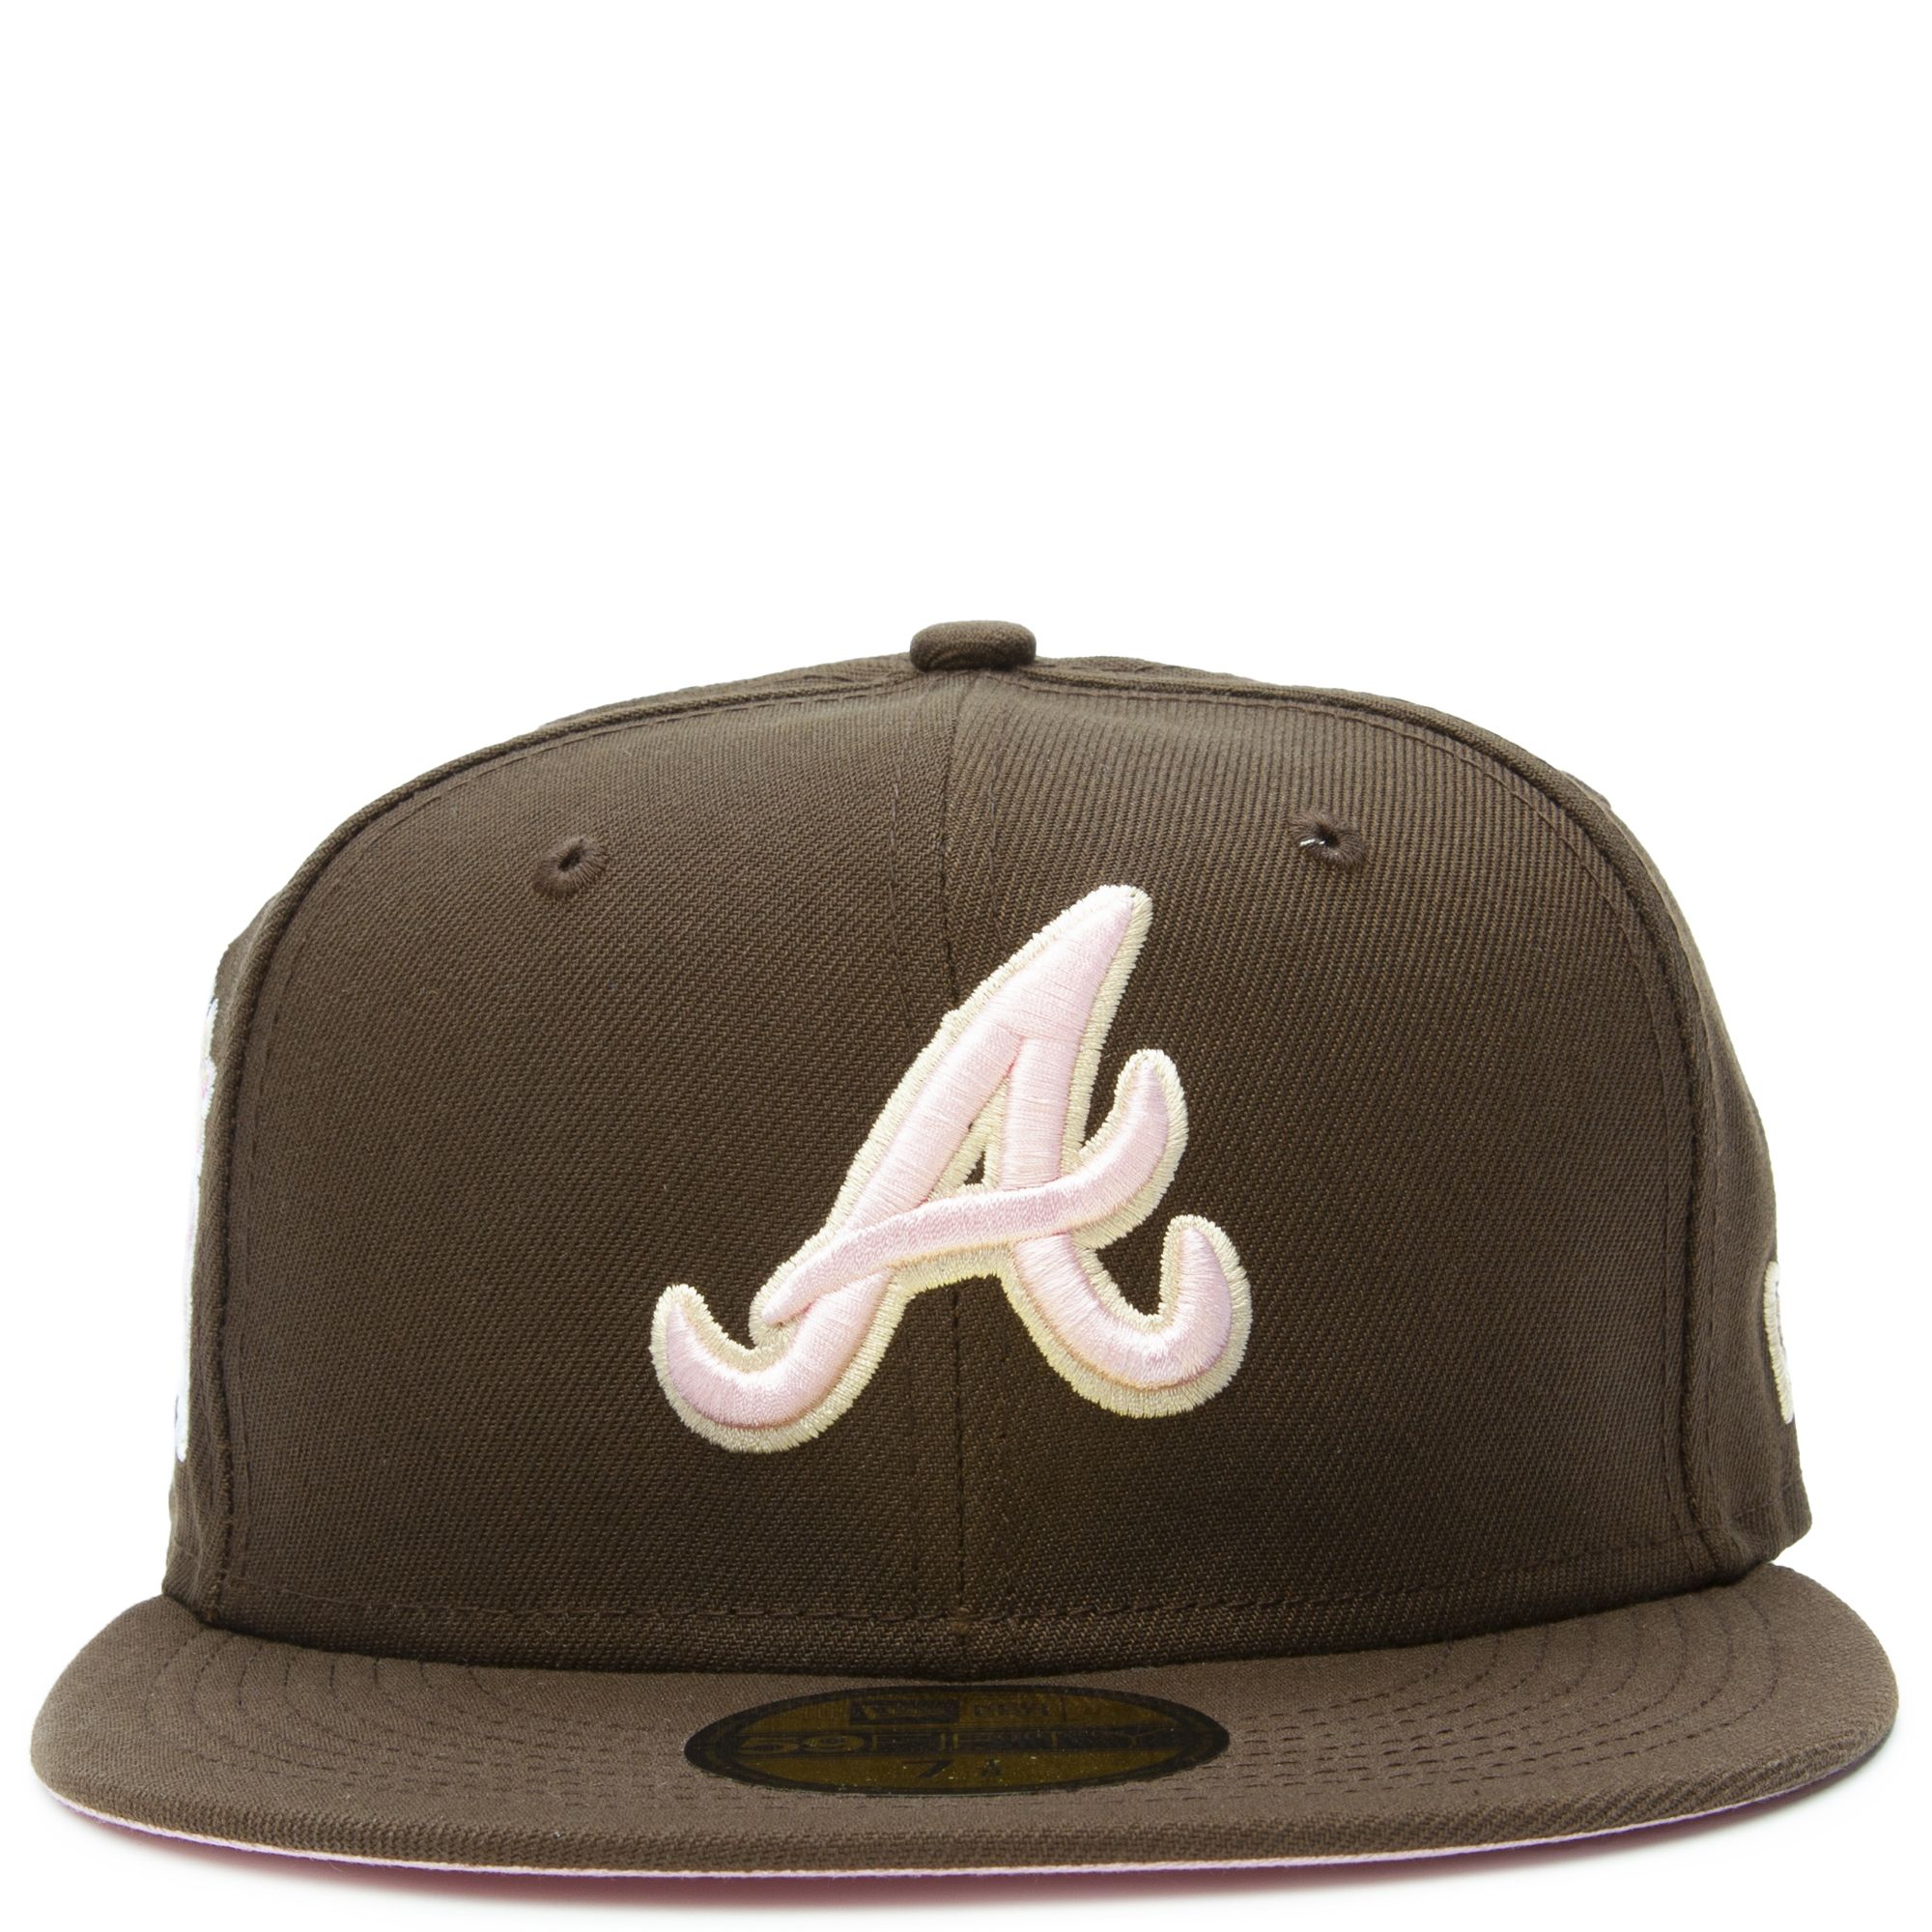 MLB ALL-STAR EDITION ATLANTA BRAVES 59FIFTY FITTED HAT 70701633